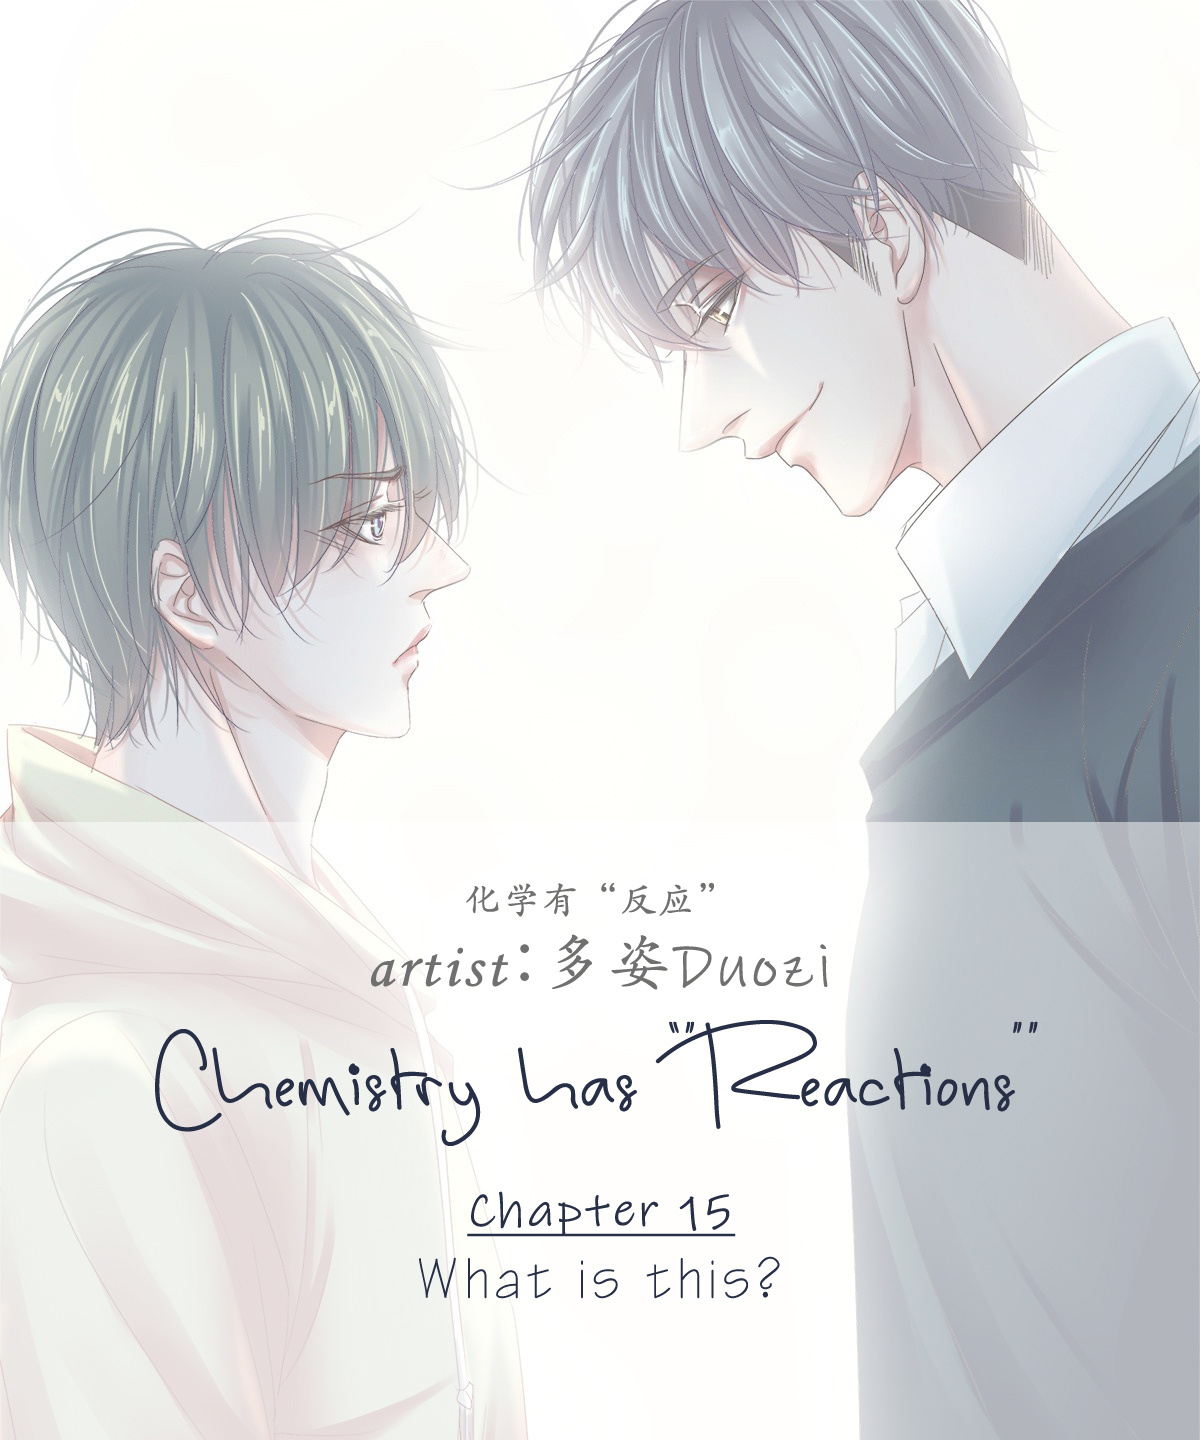 Chemistry Has "reactions" Chapter 15 #1